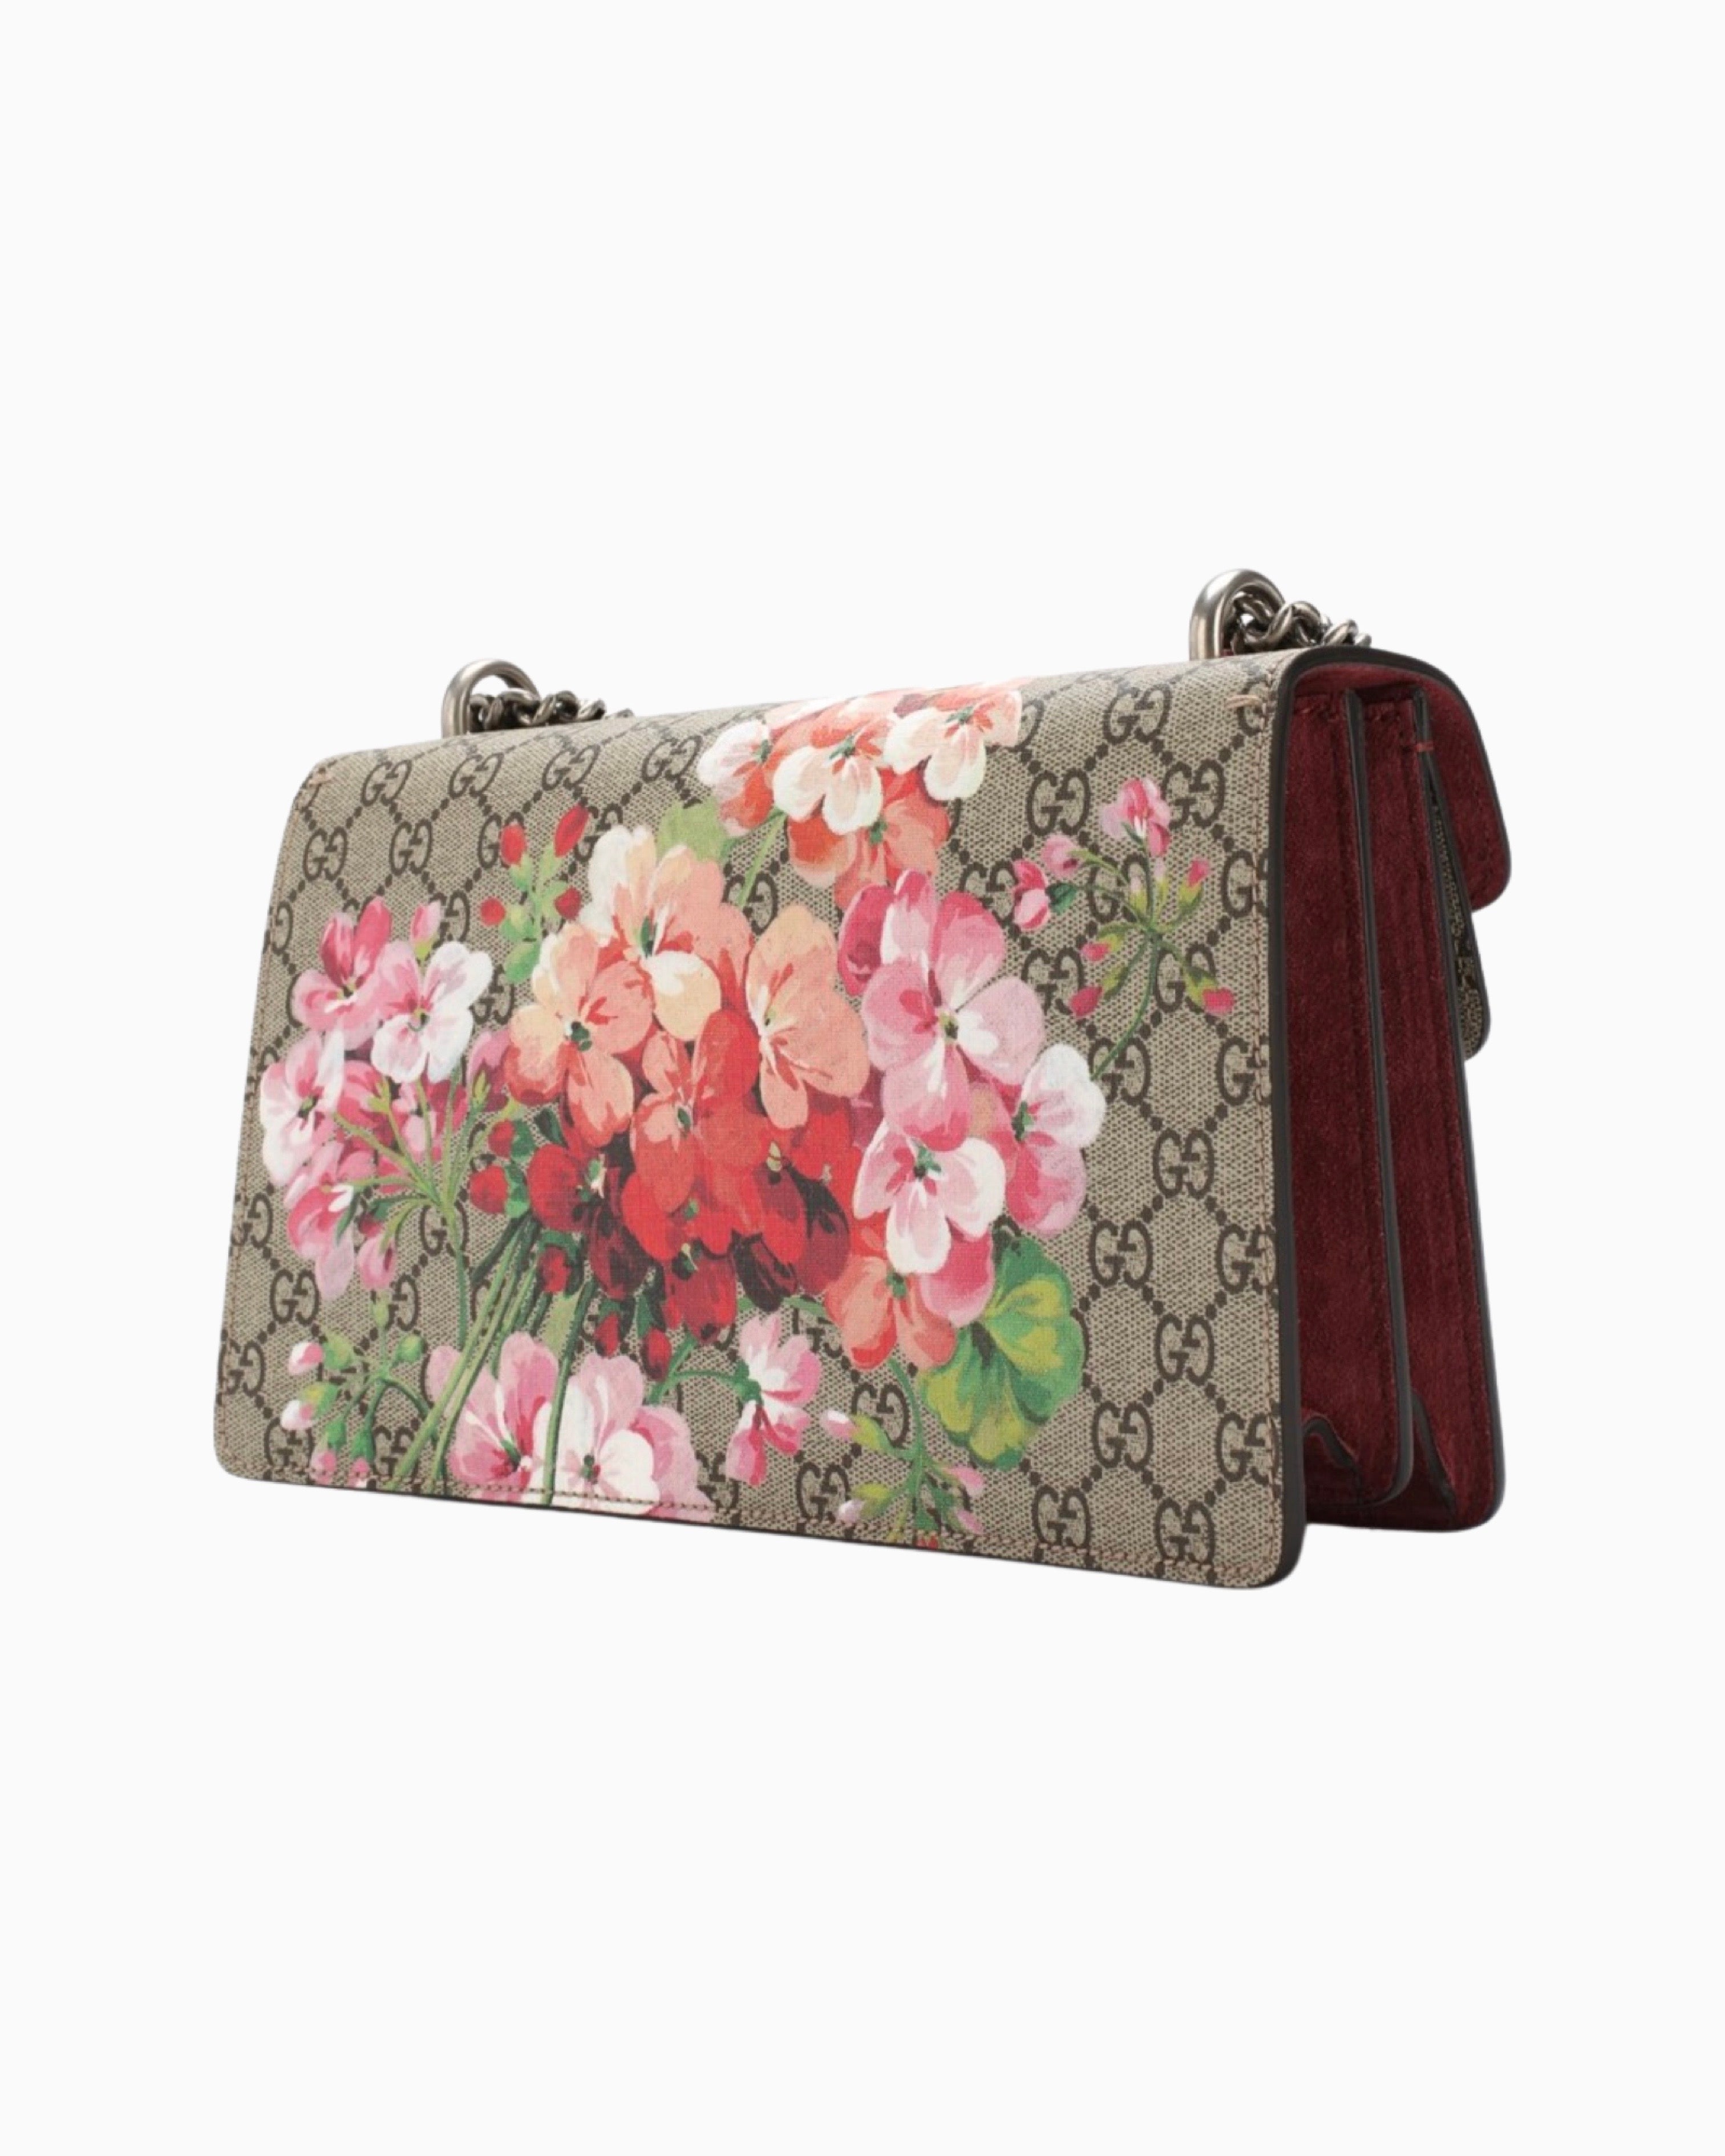 Gucci Blooms Dionysus WOC – Dina C's Fab and Funky Consignment